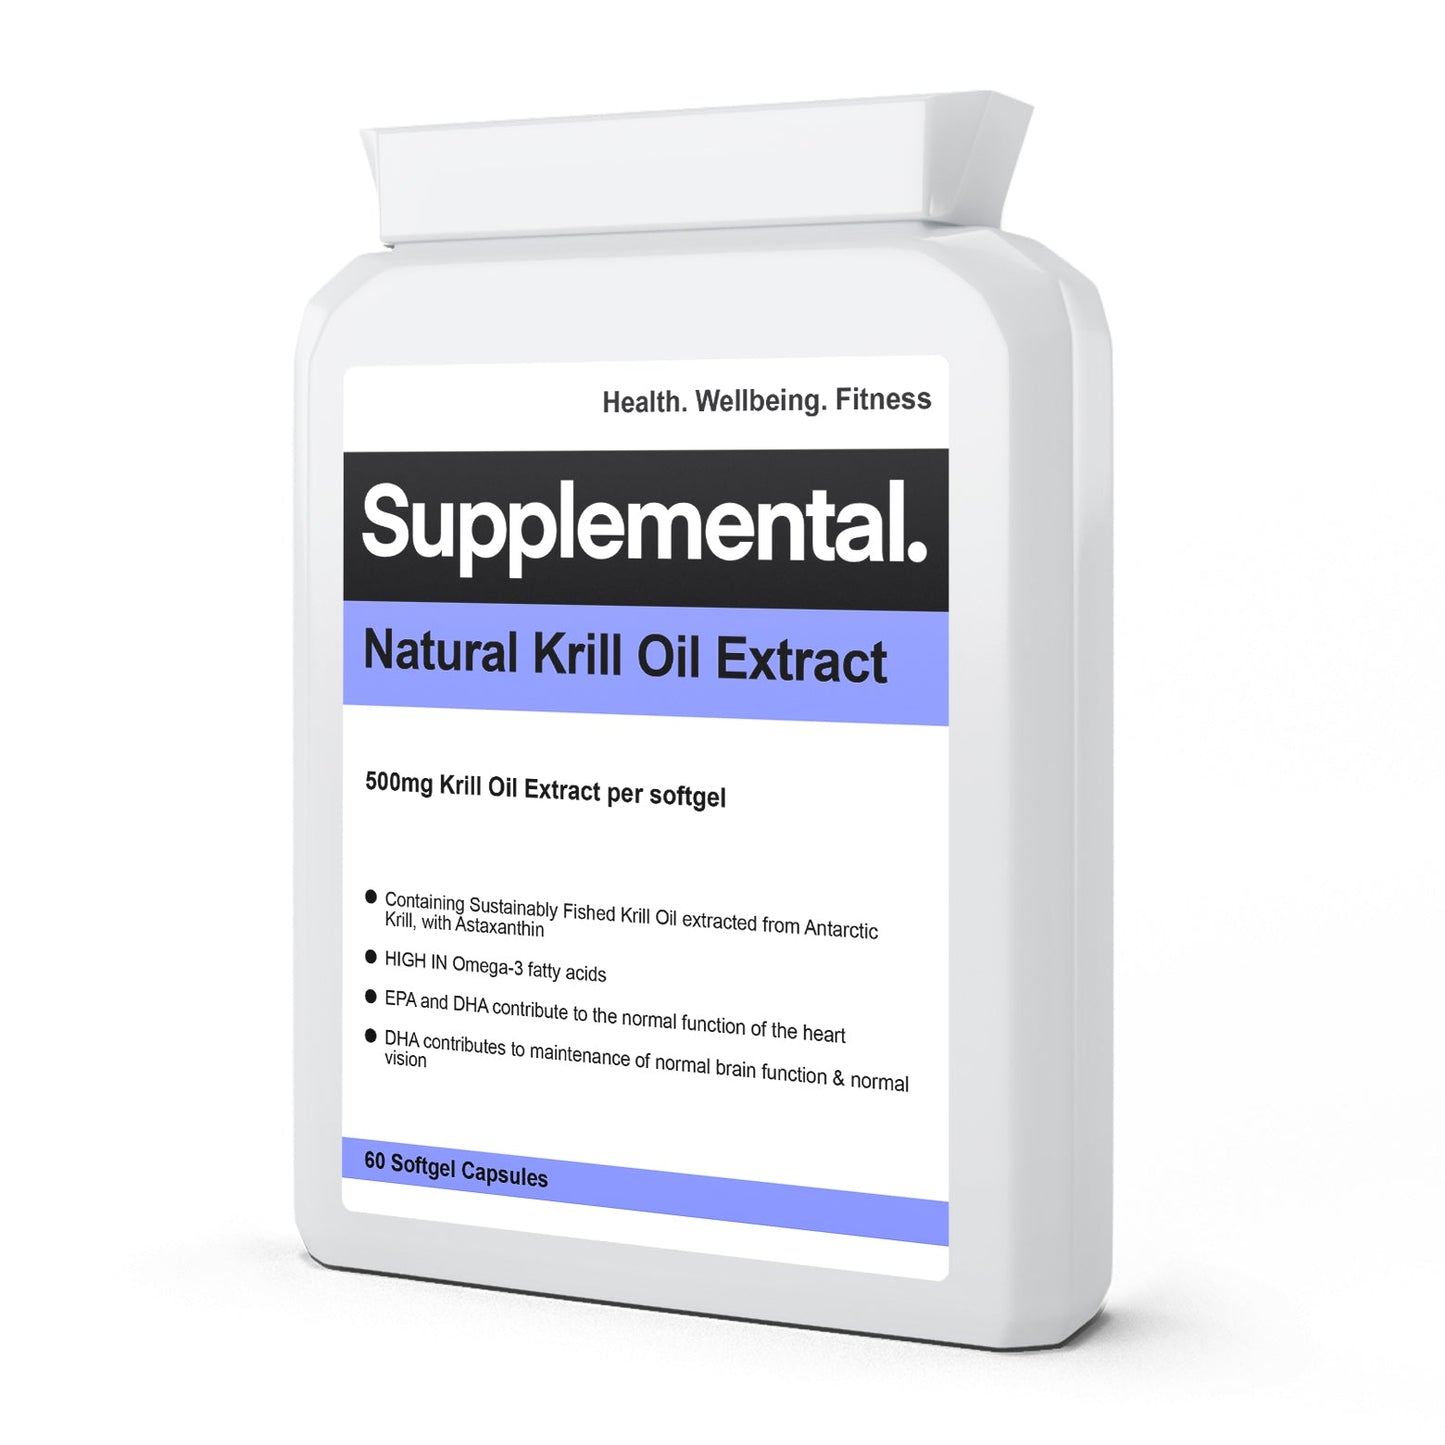 Natural Krill Oil Extract - Supplemental